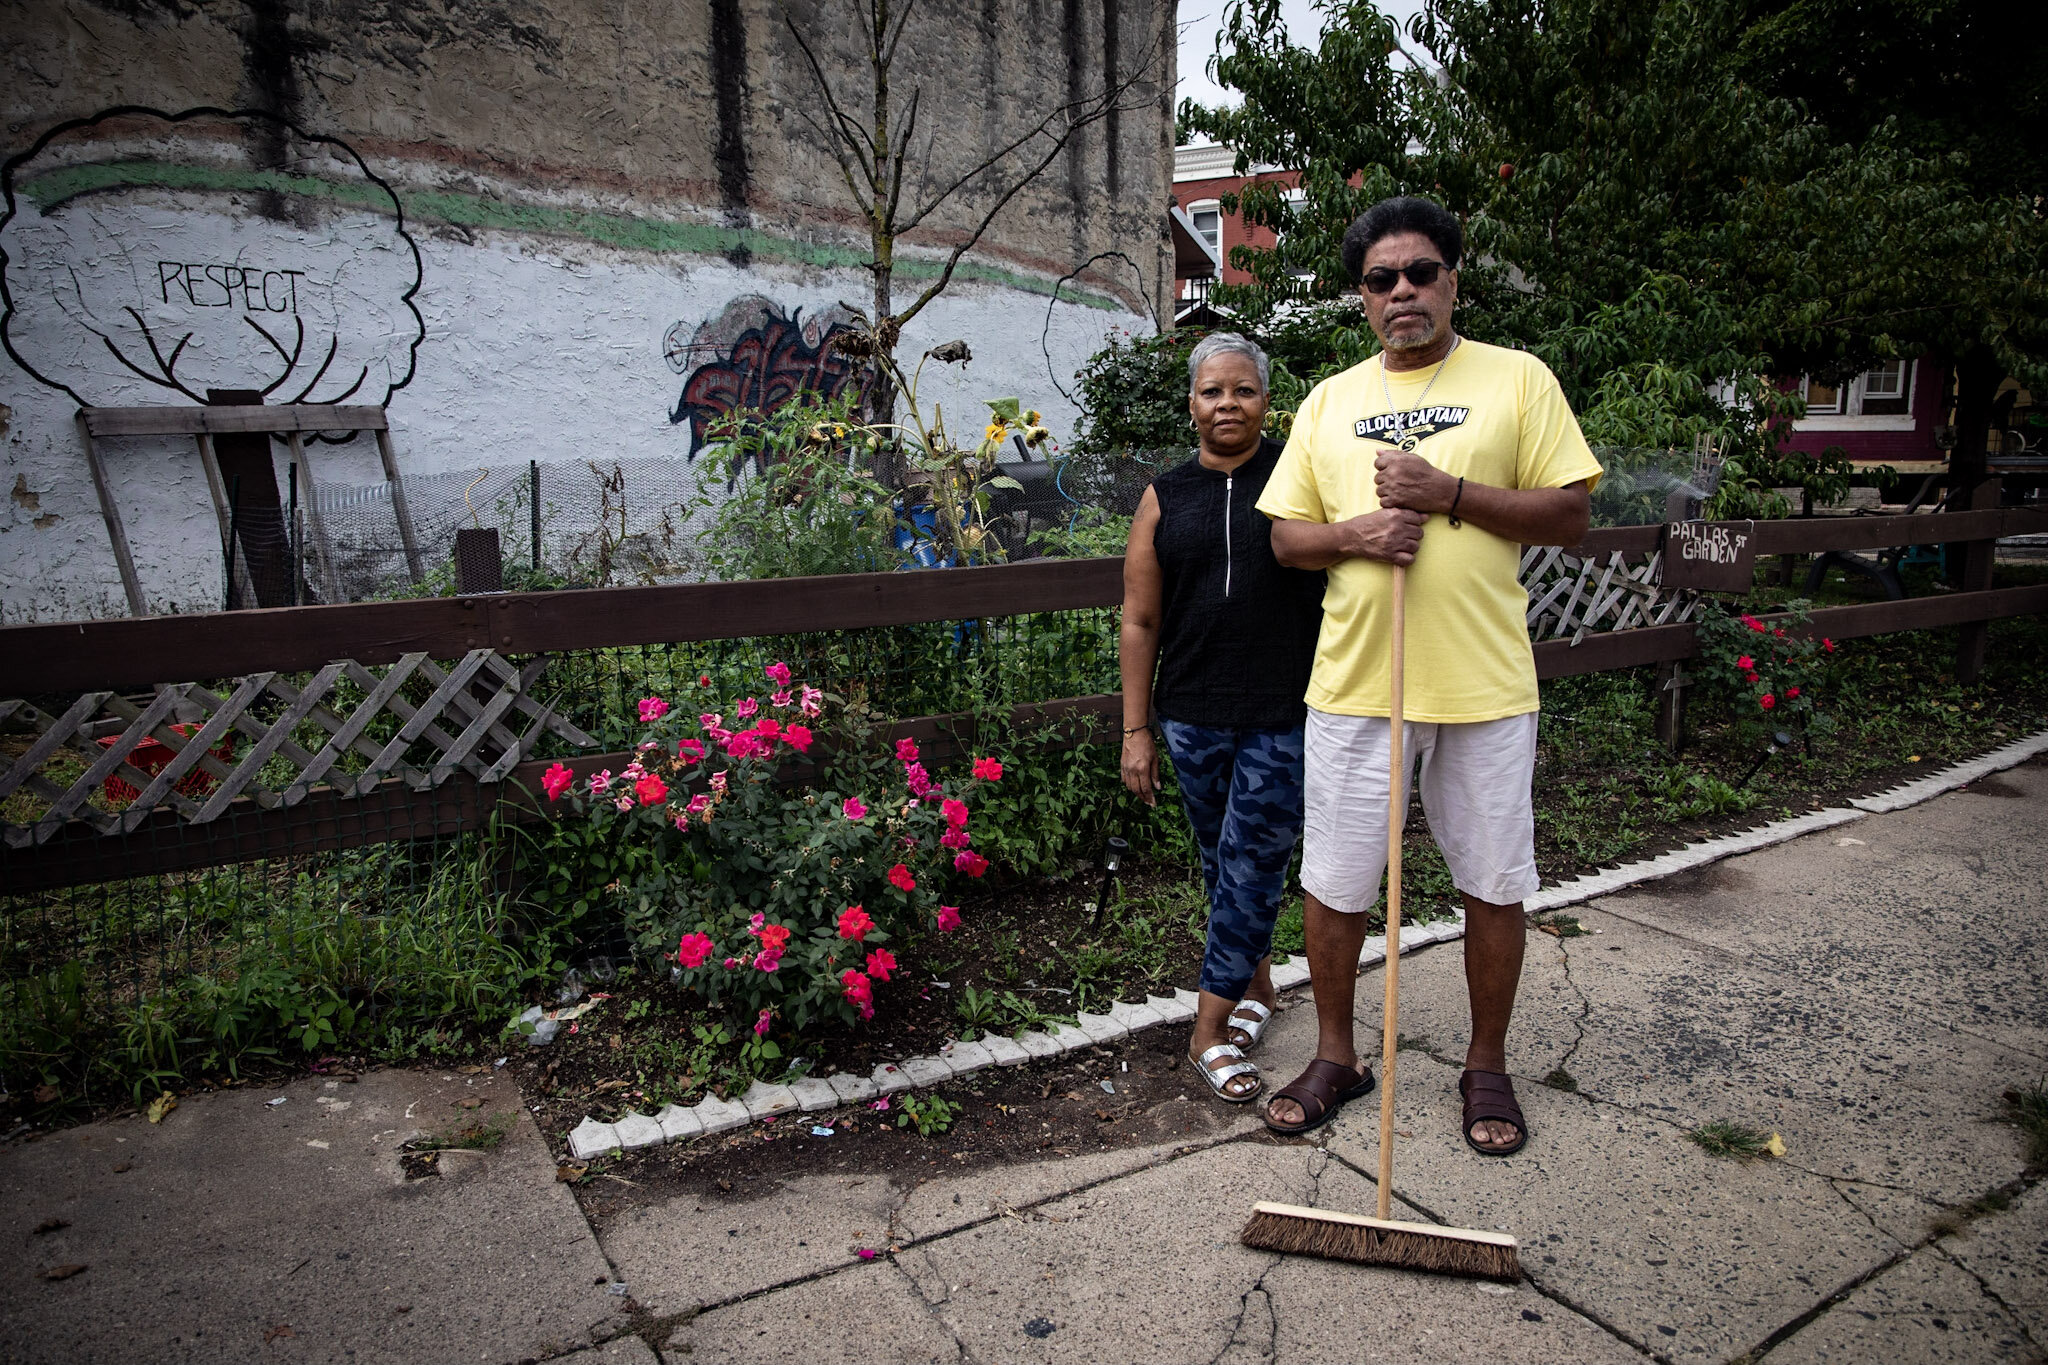 Darnell and Alice Perry serve as co-captains of the 1000 block of Pallas Street in West Philadelphia. Their stretch of Pallas won first place in PMBC’s 2019 Clean Block Contest.